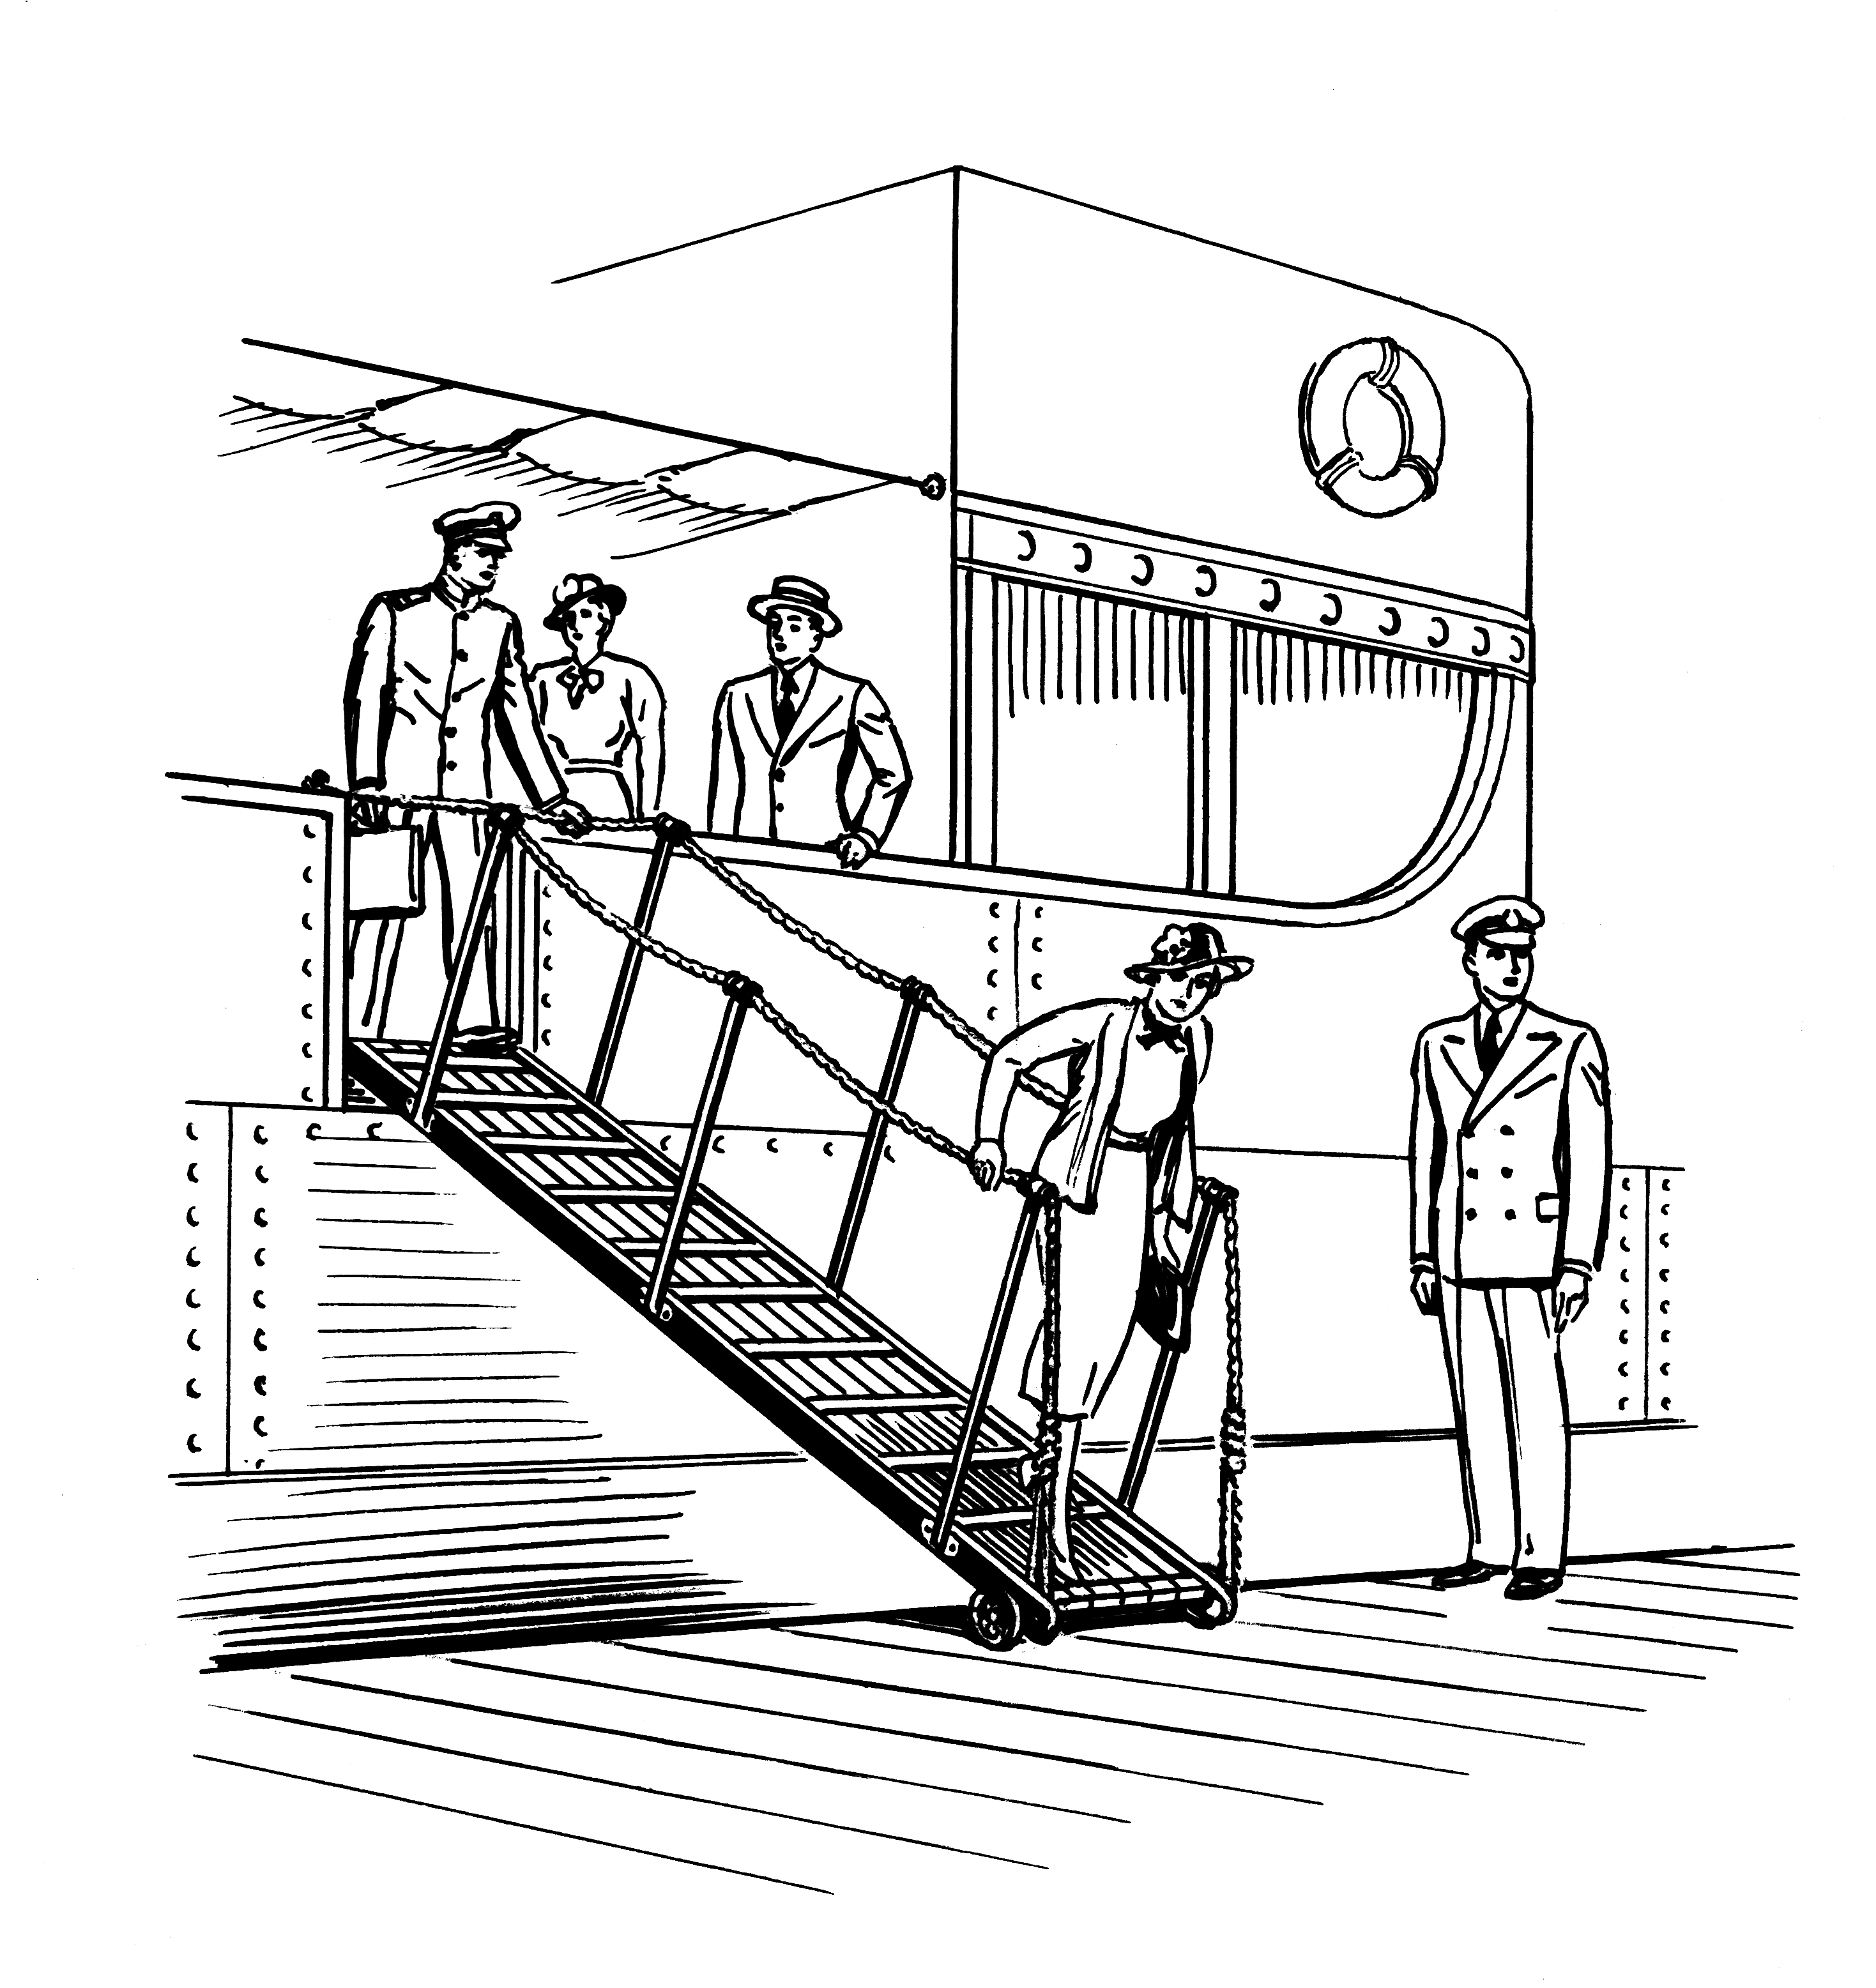 File:GANG PLANK (PSF).png - Wikimedia Commons